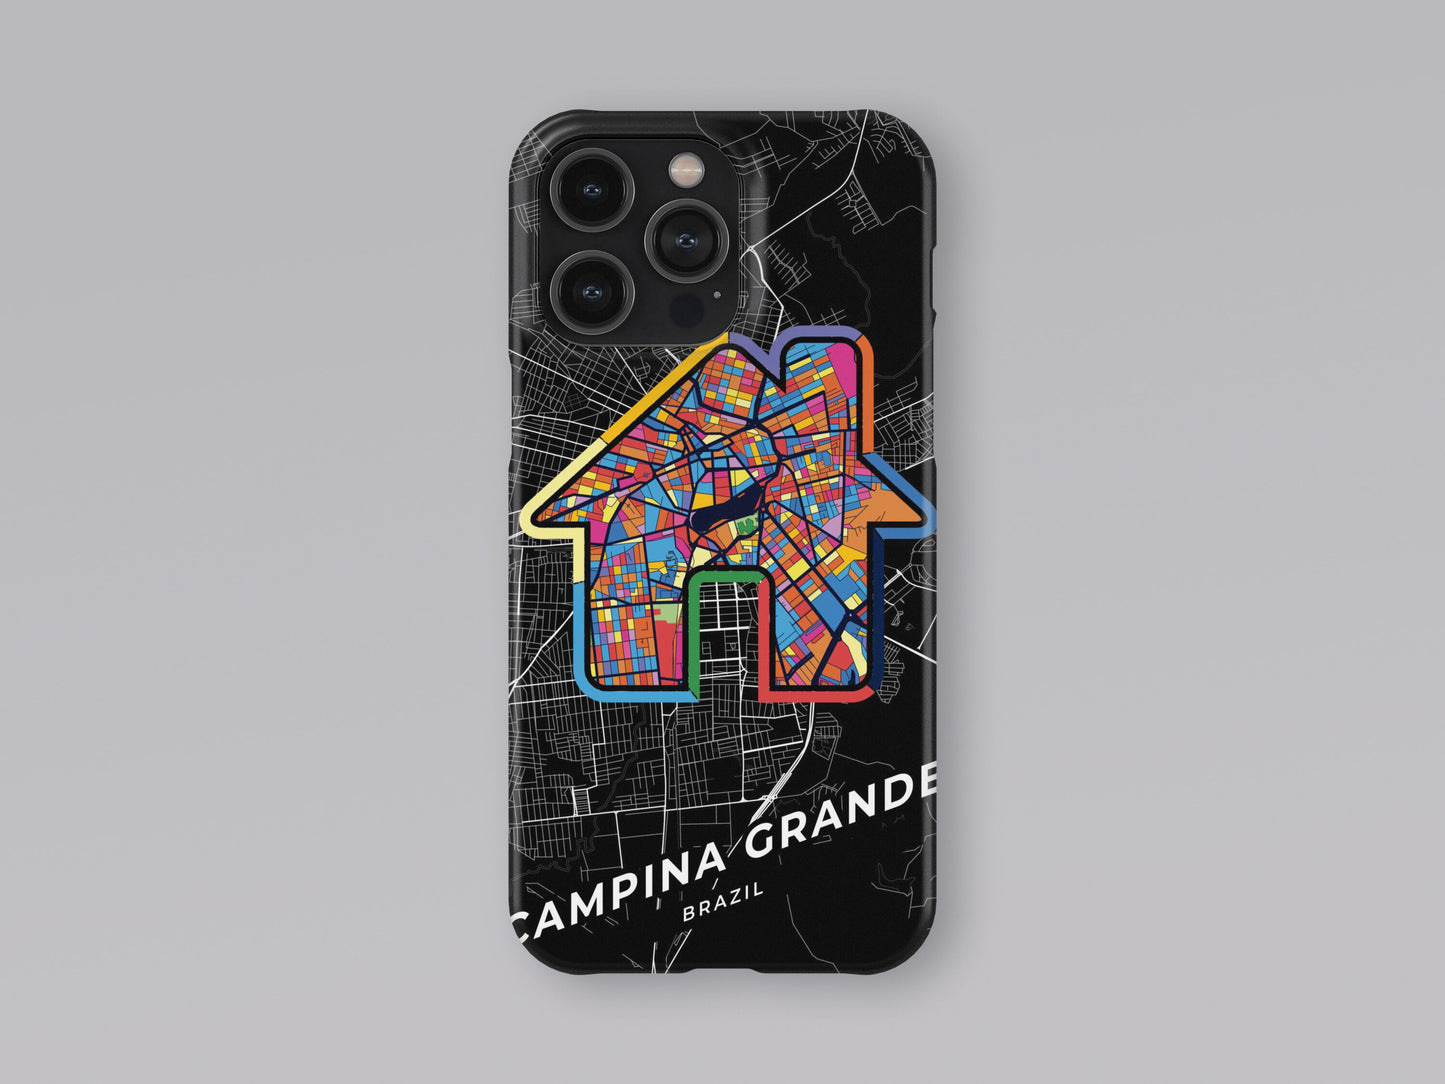 Campina Grande Brazil slim phone case with colorful icon. Birthday, wedding or housewarming gift. Couple match cases. 3